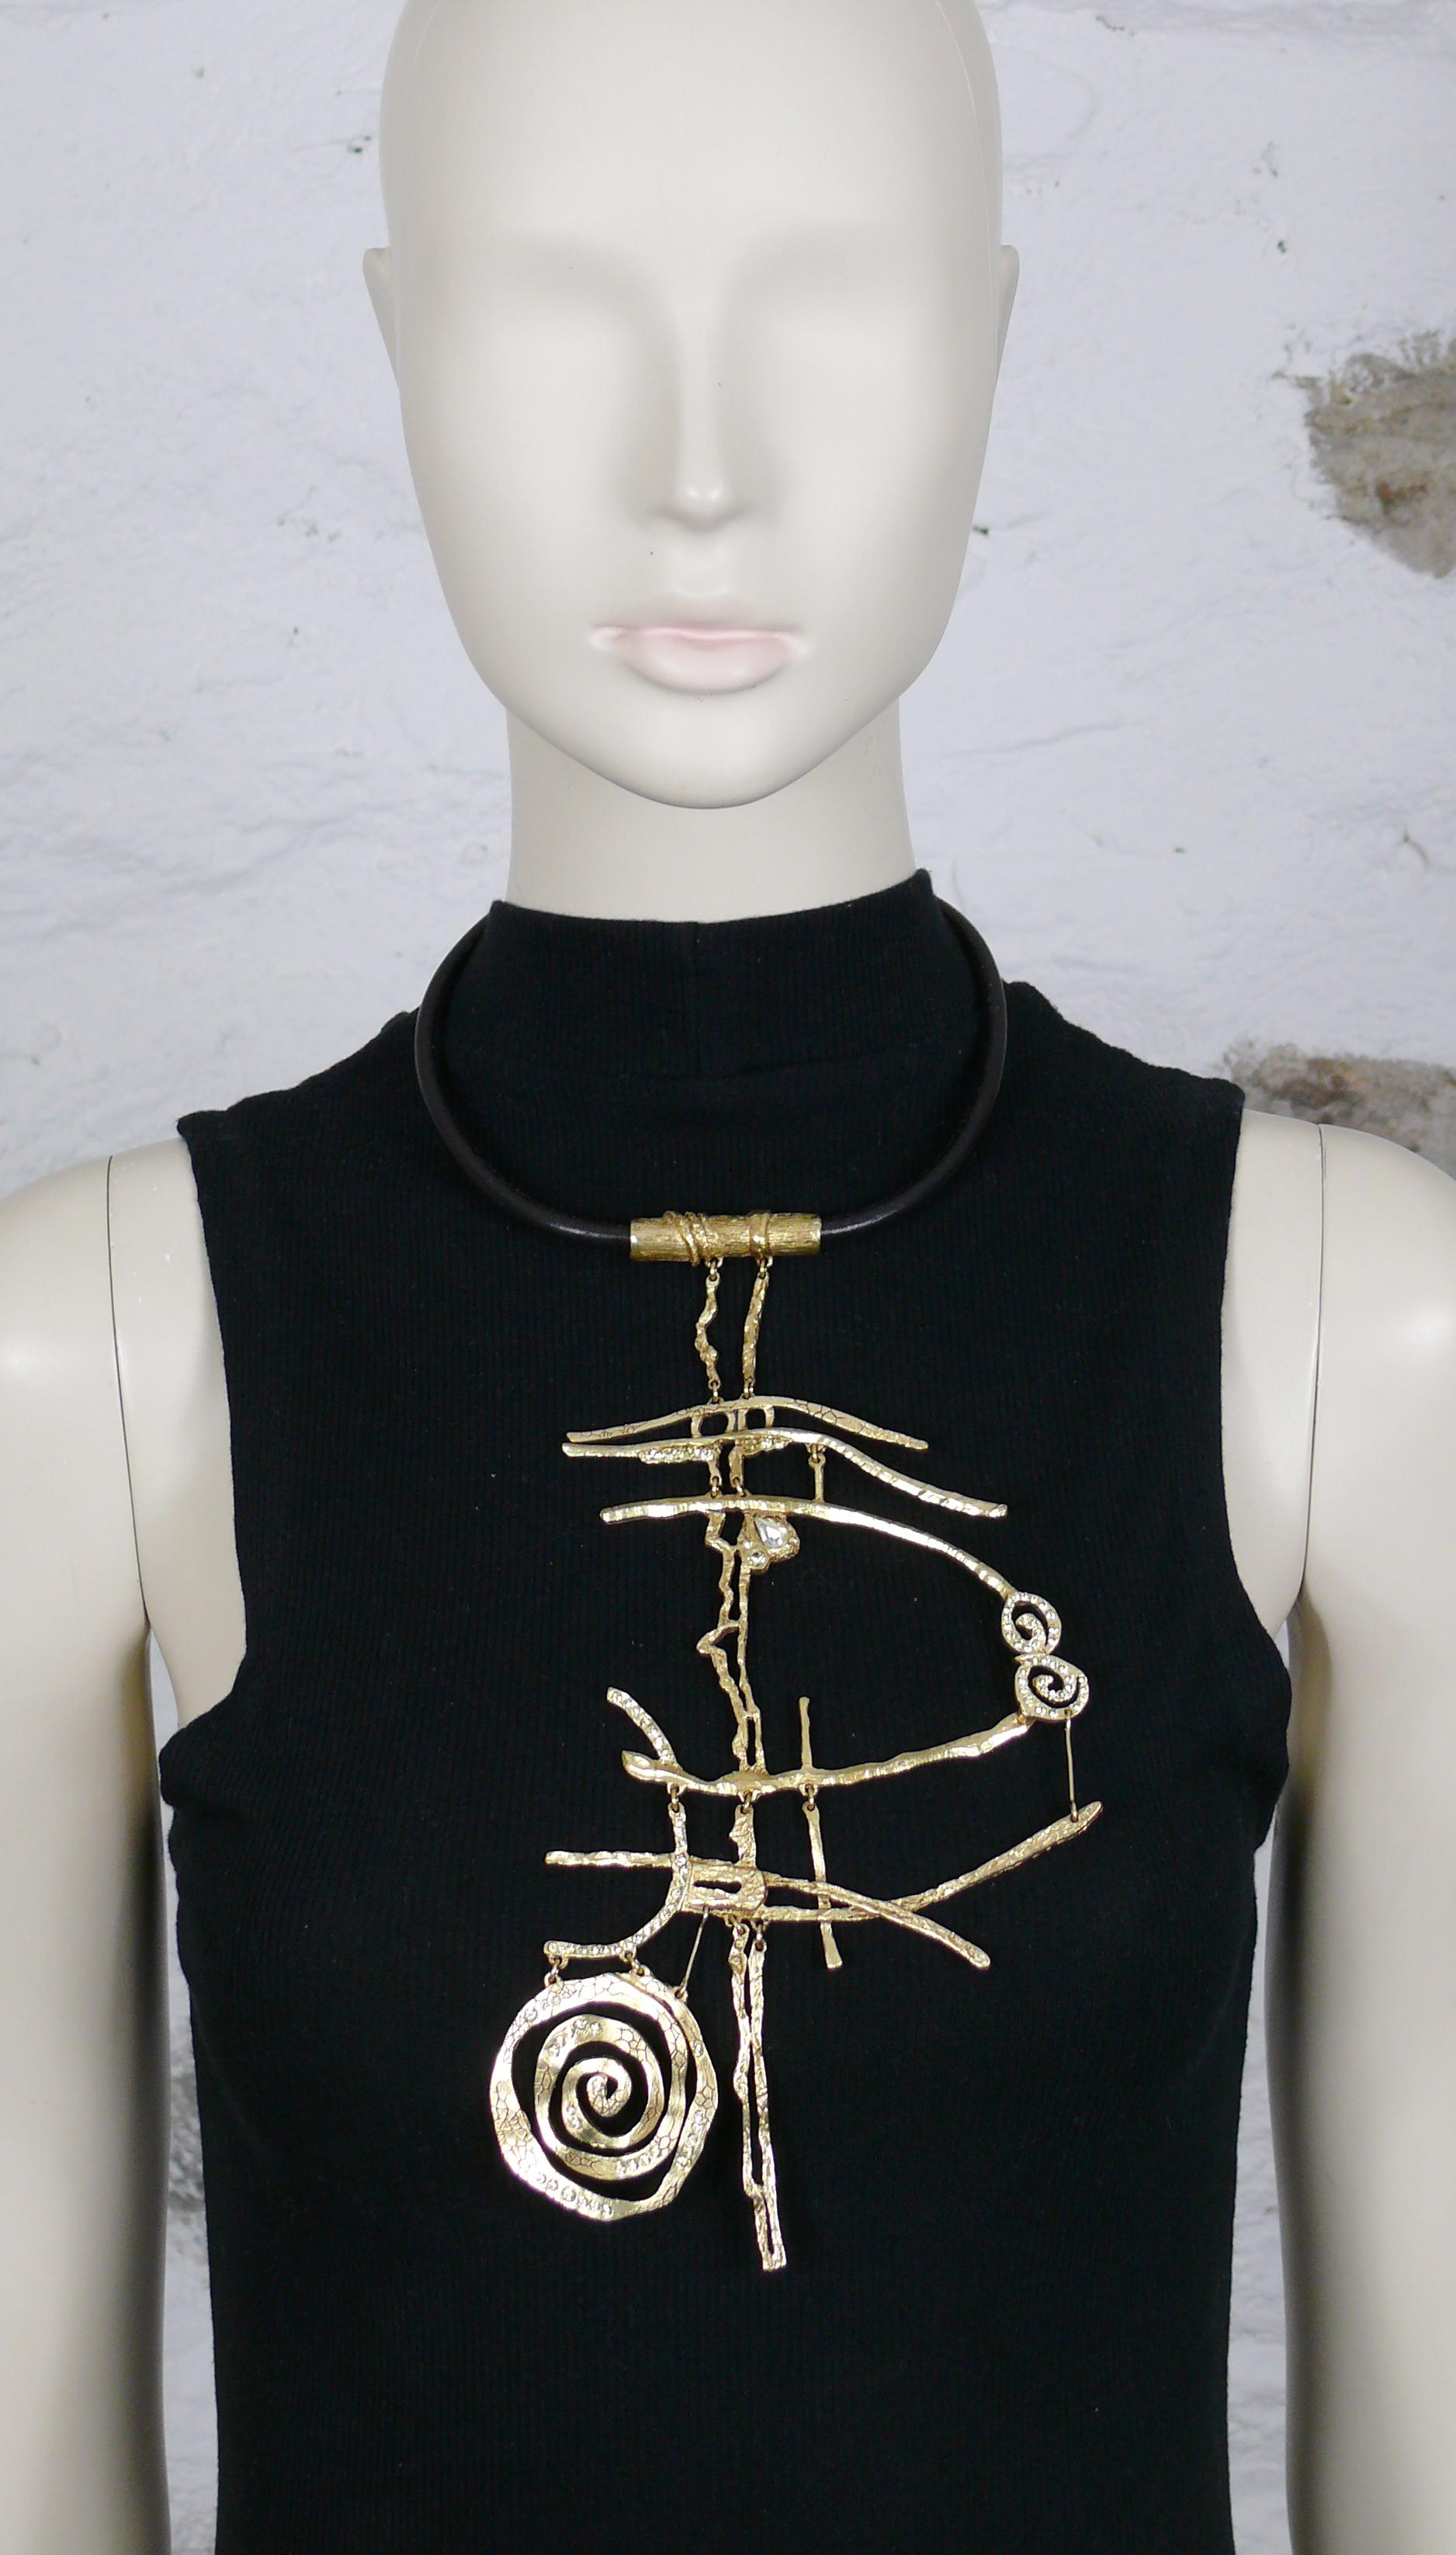 CHRISTIAN LACROIX vintage antiqued gold toned necklace featuring a black leather cord collar and an asymetric brutalist plastron pendant embellished with jonquil color crystals.

T bar and toggle closure.

Marked CHRISTIAN LACROIX CL Made in